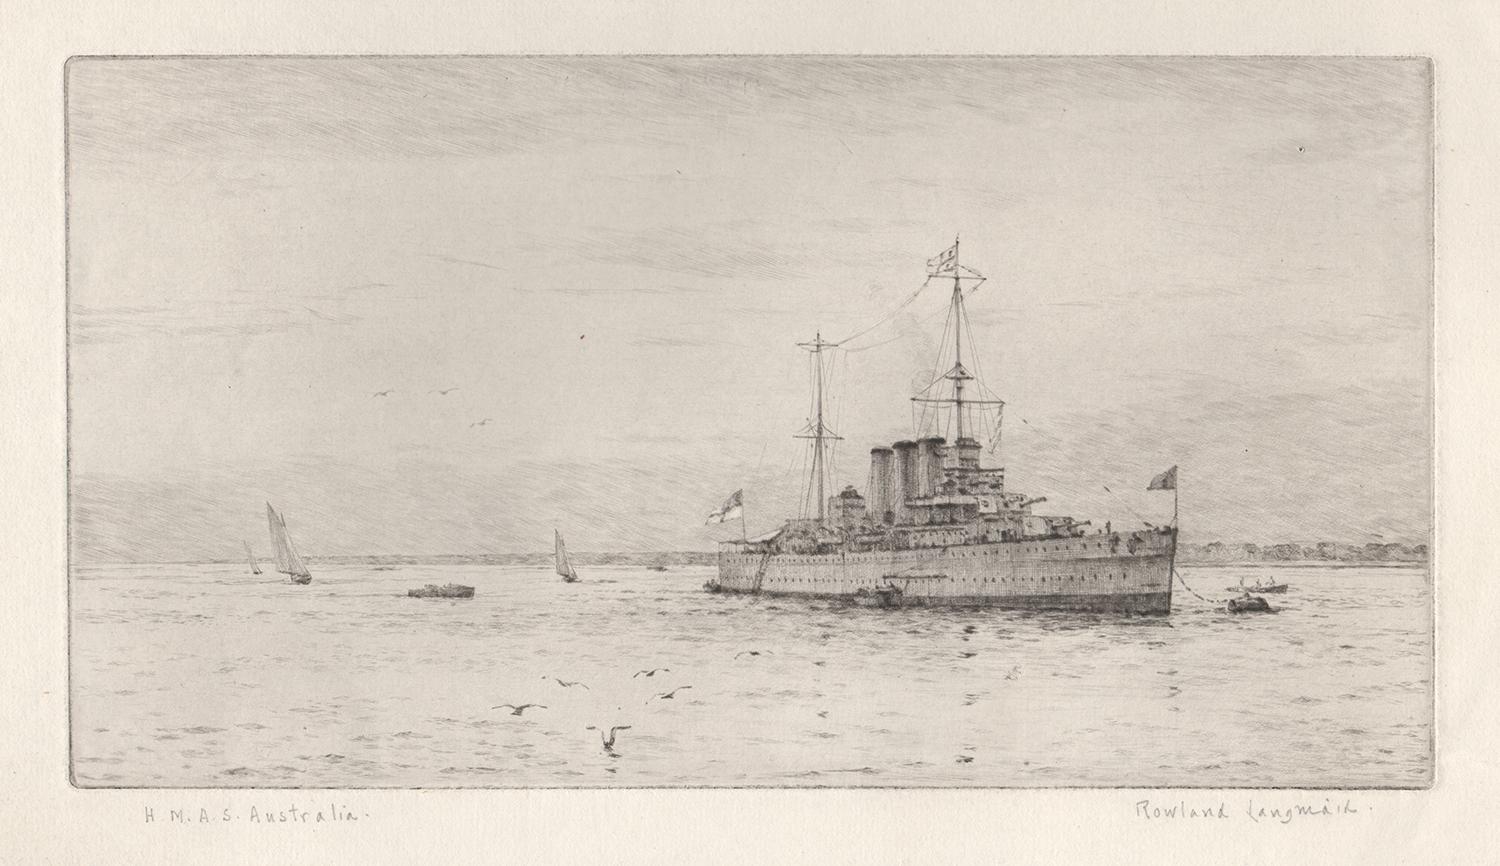 'HMAS Australia'

Signed in pencil by the artist below the image. 

Rowland Langmaid was a marine painter and etcher who studied under William Lionel Wylie. Langmaid joined the Royal Navy in 1910 and went to sea at the beginning of the First World